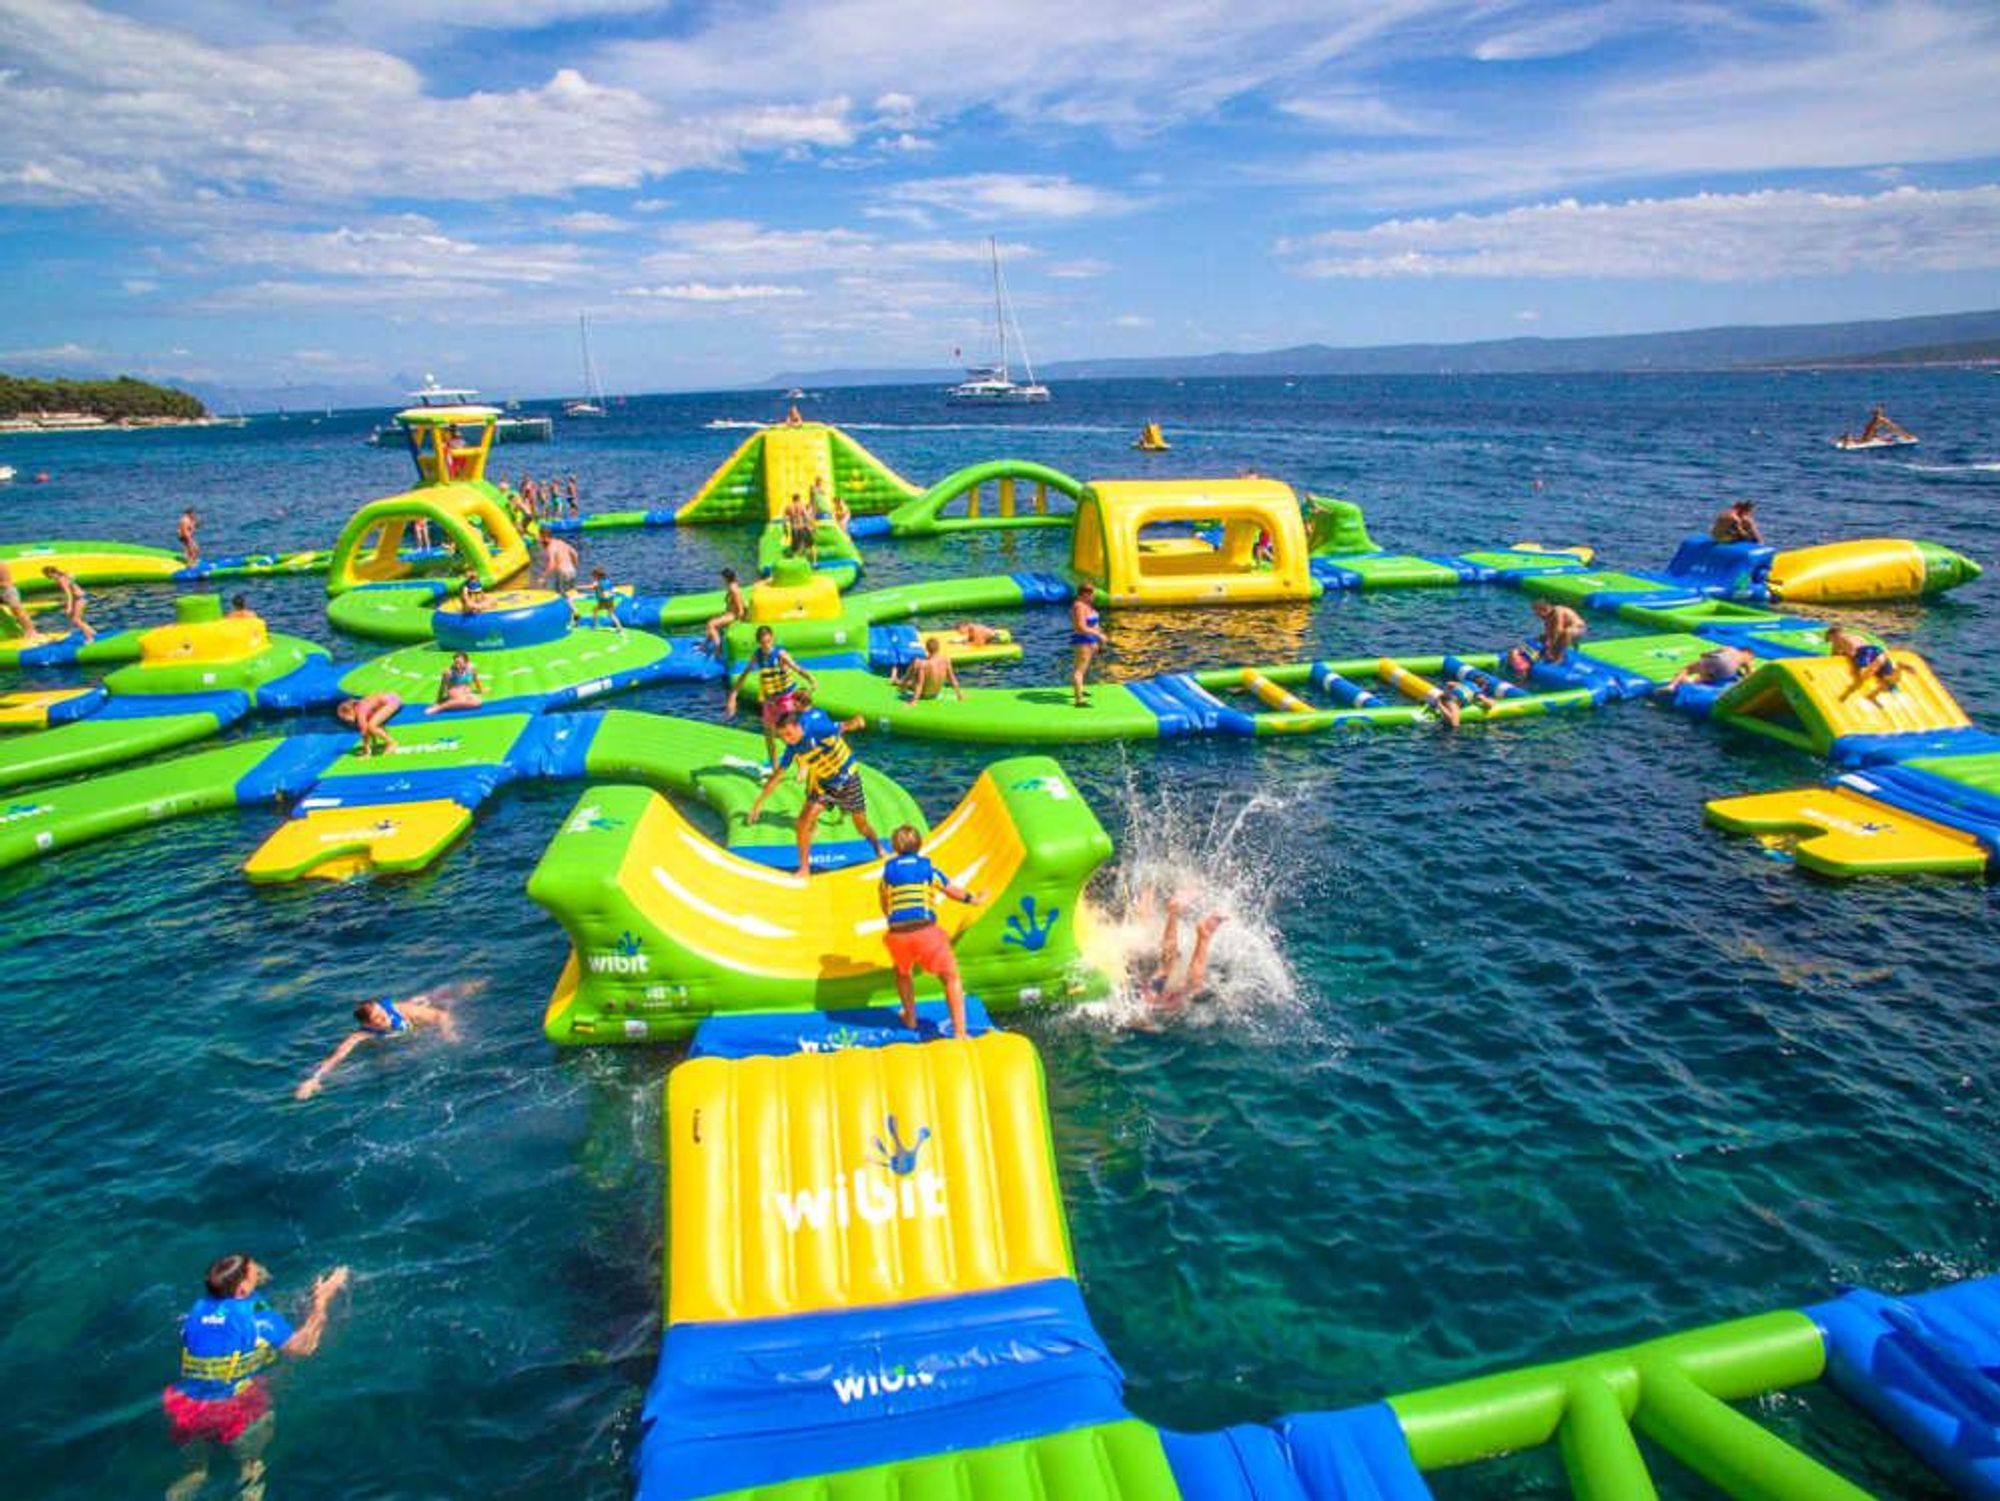 Wipe Zone, the Huge Inflatable Water Circuit